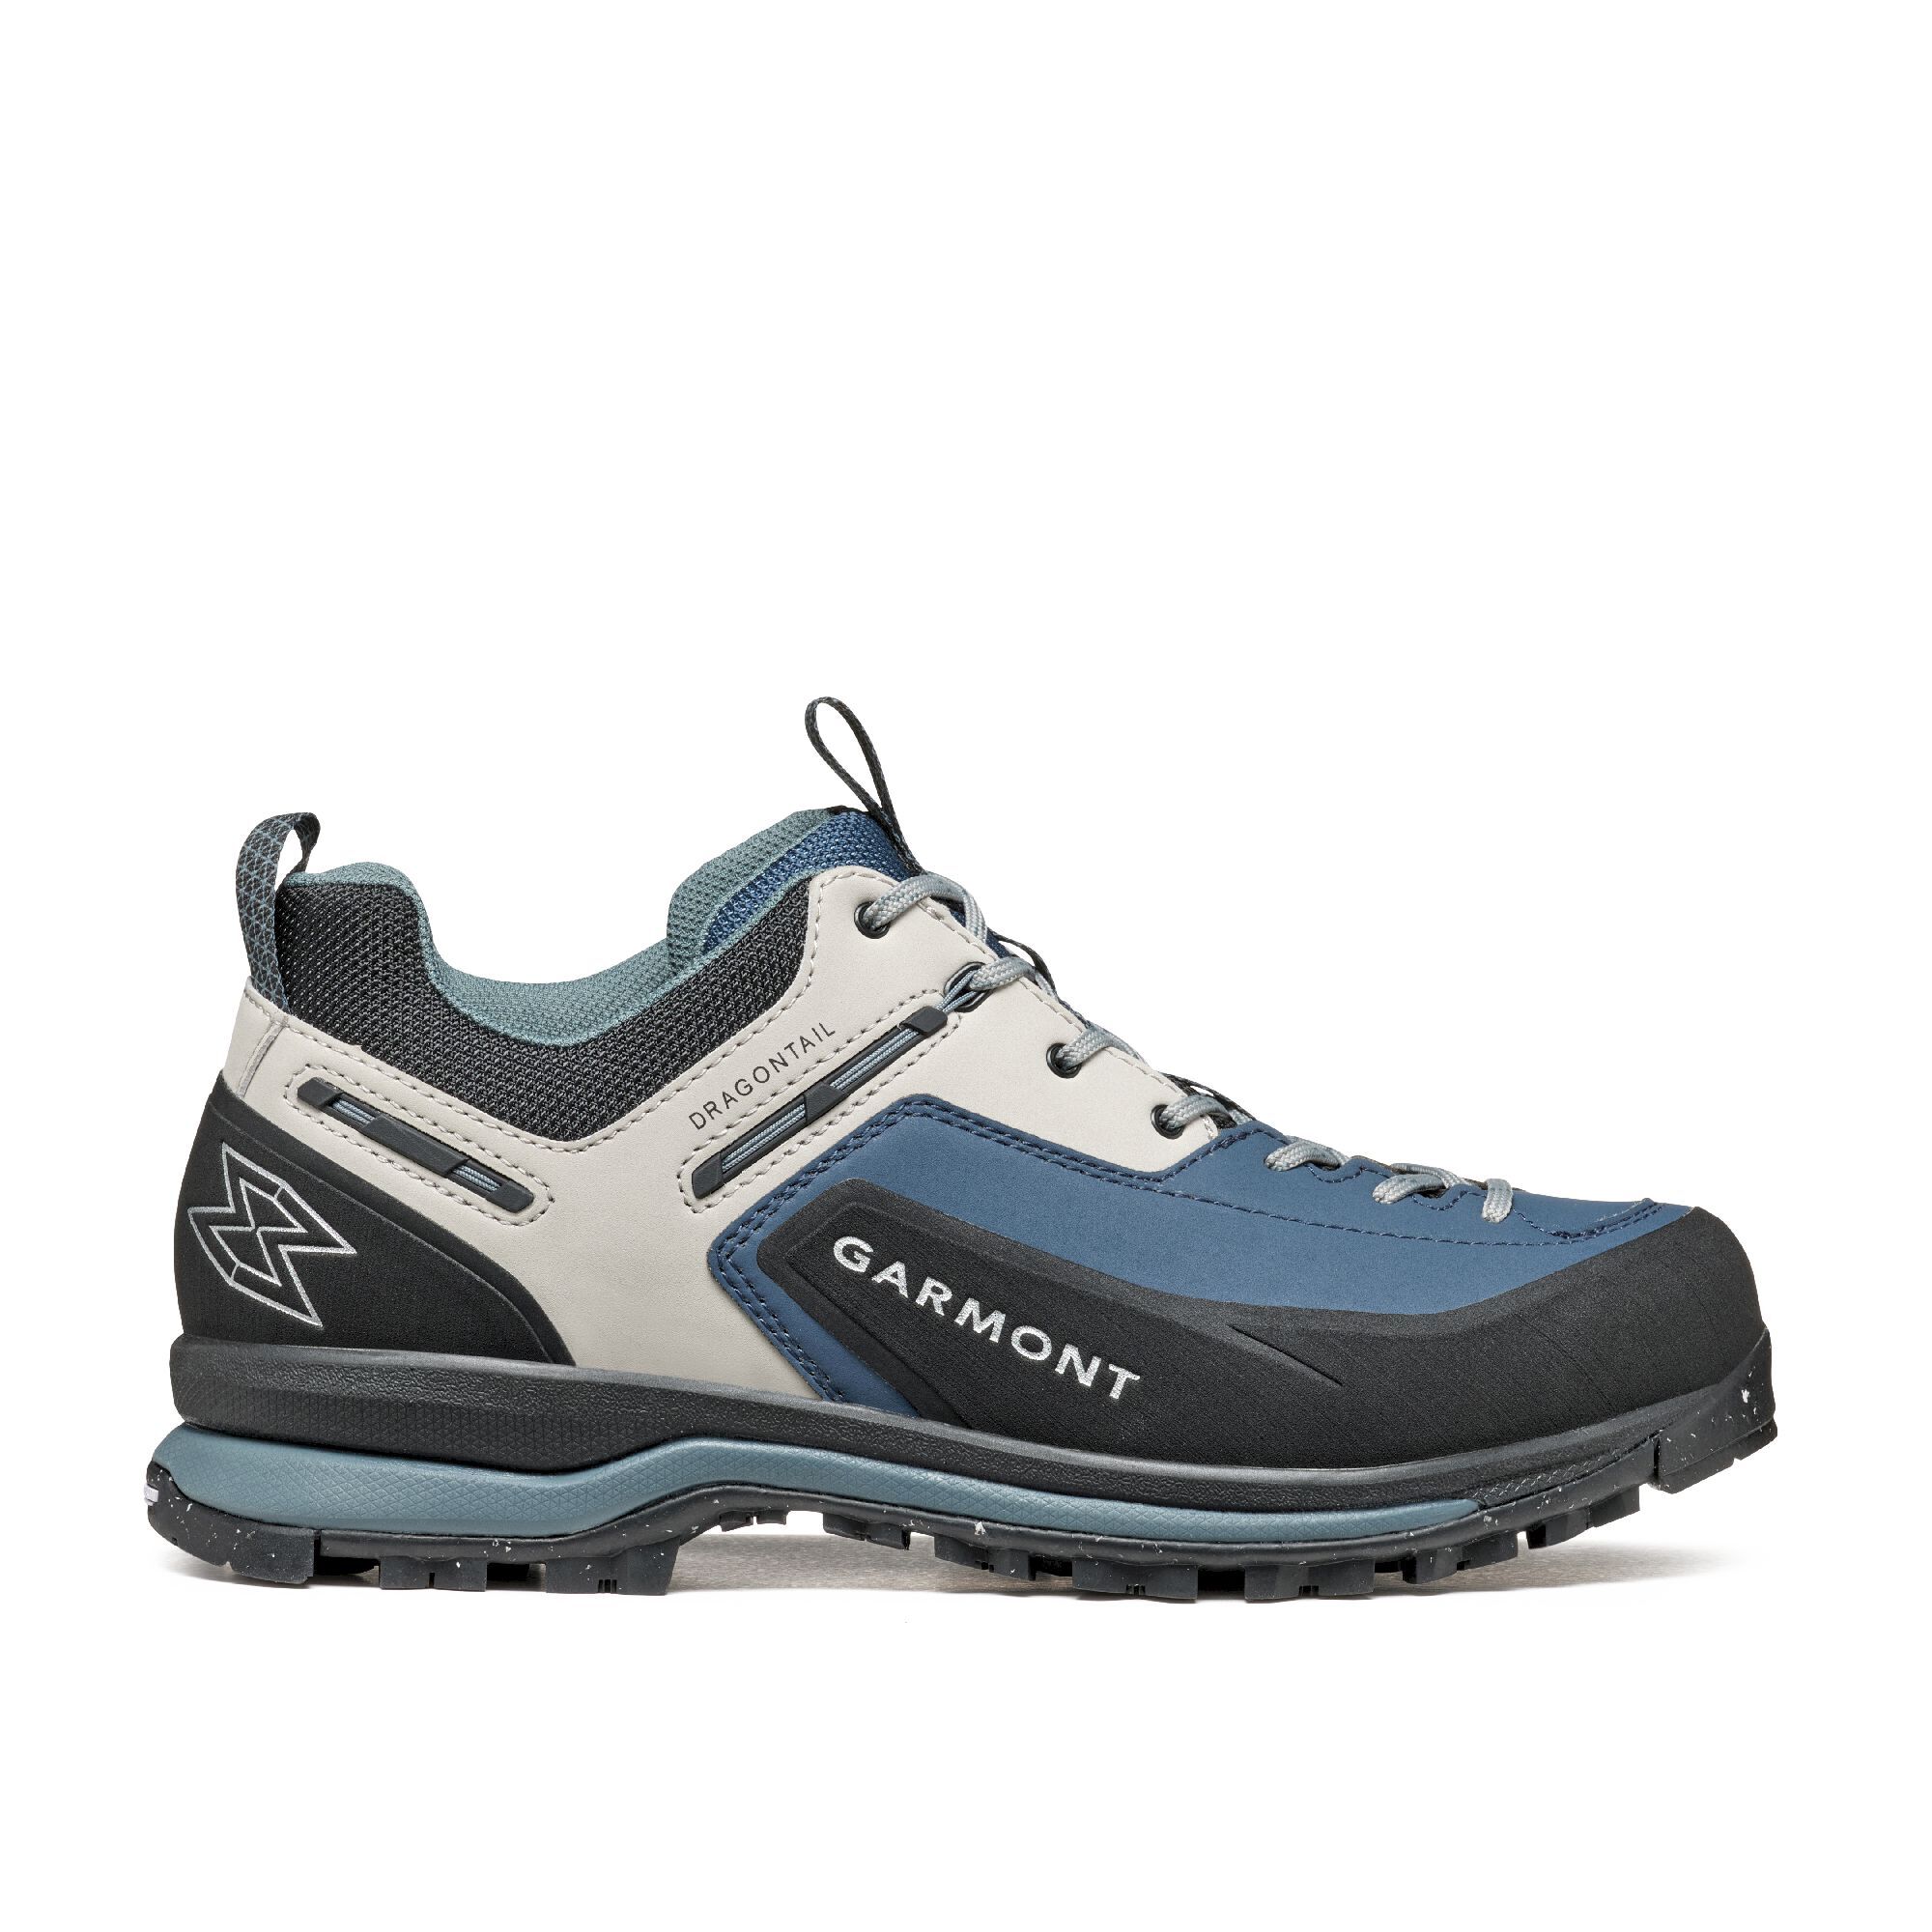 Garmont Dragontail Tech Geo - Approach shoes - Men's | Hardloop